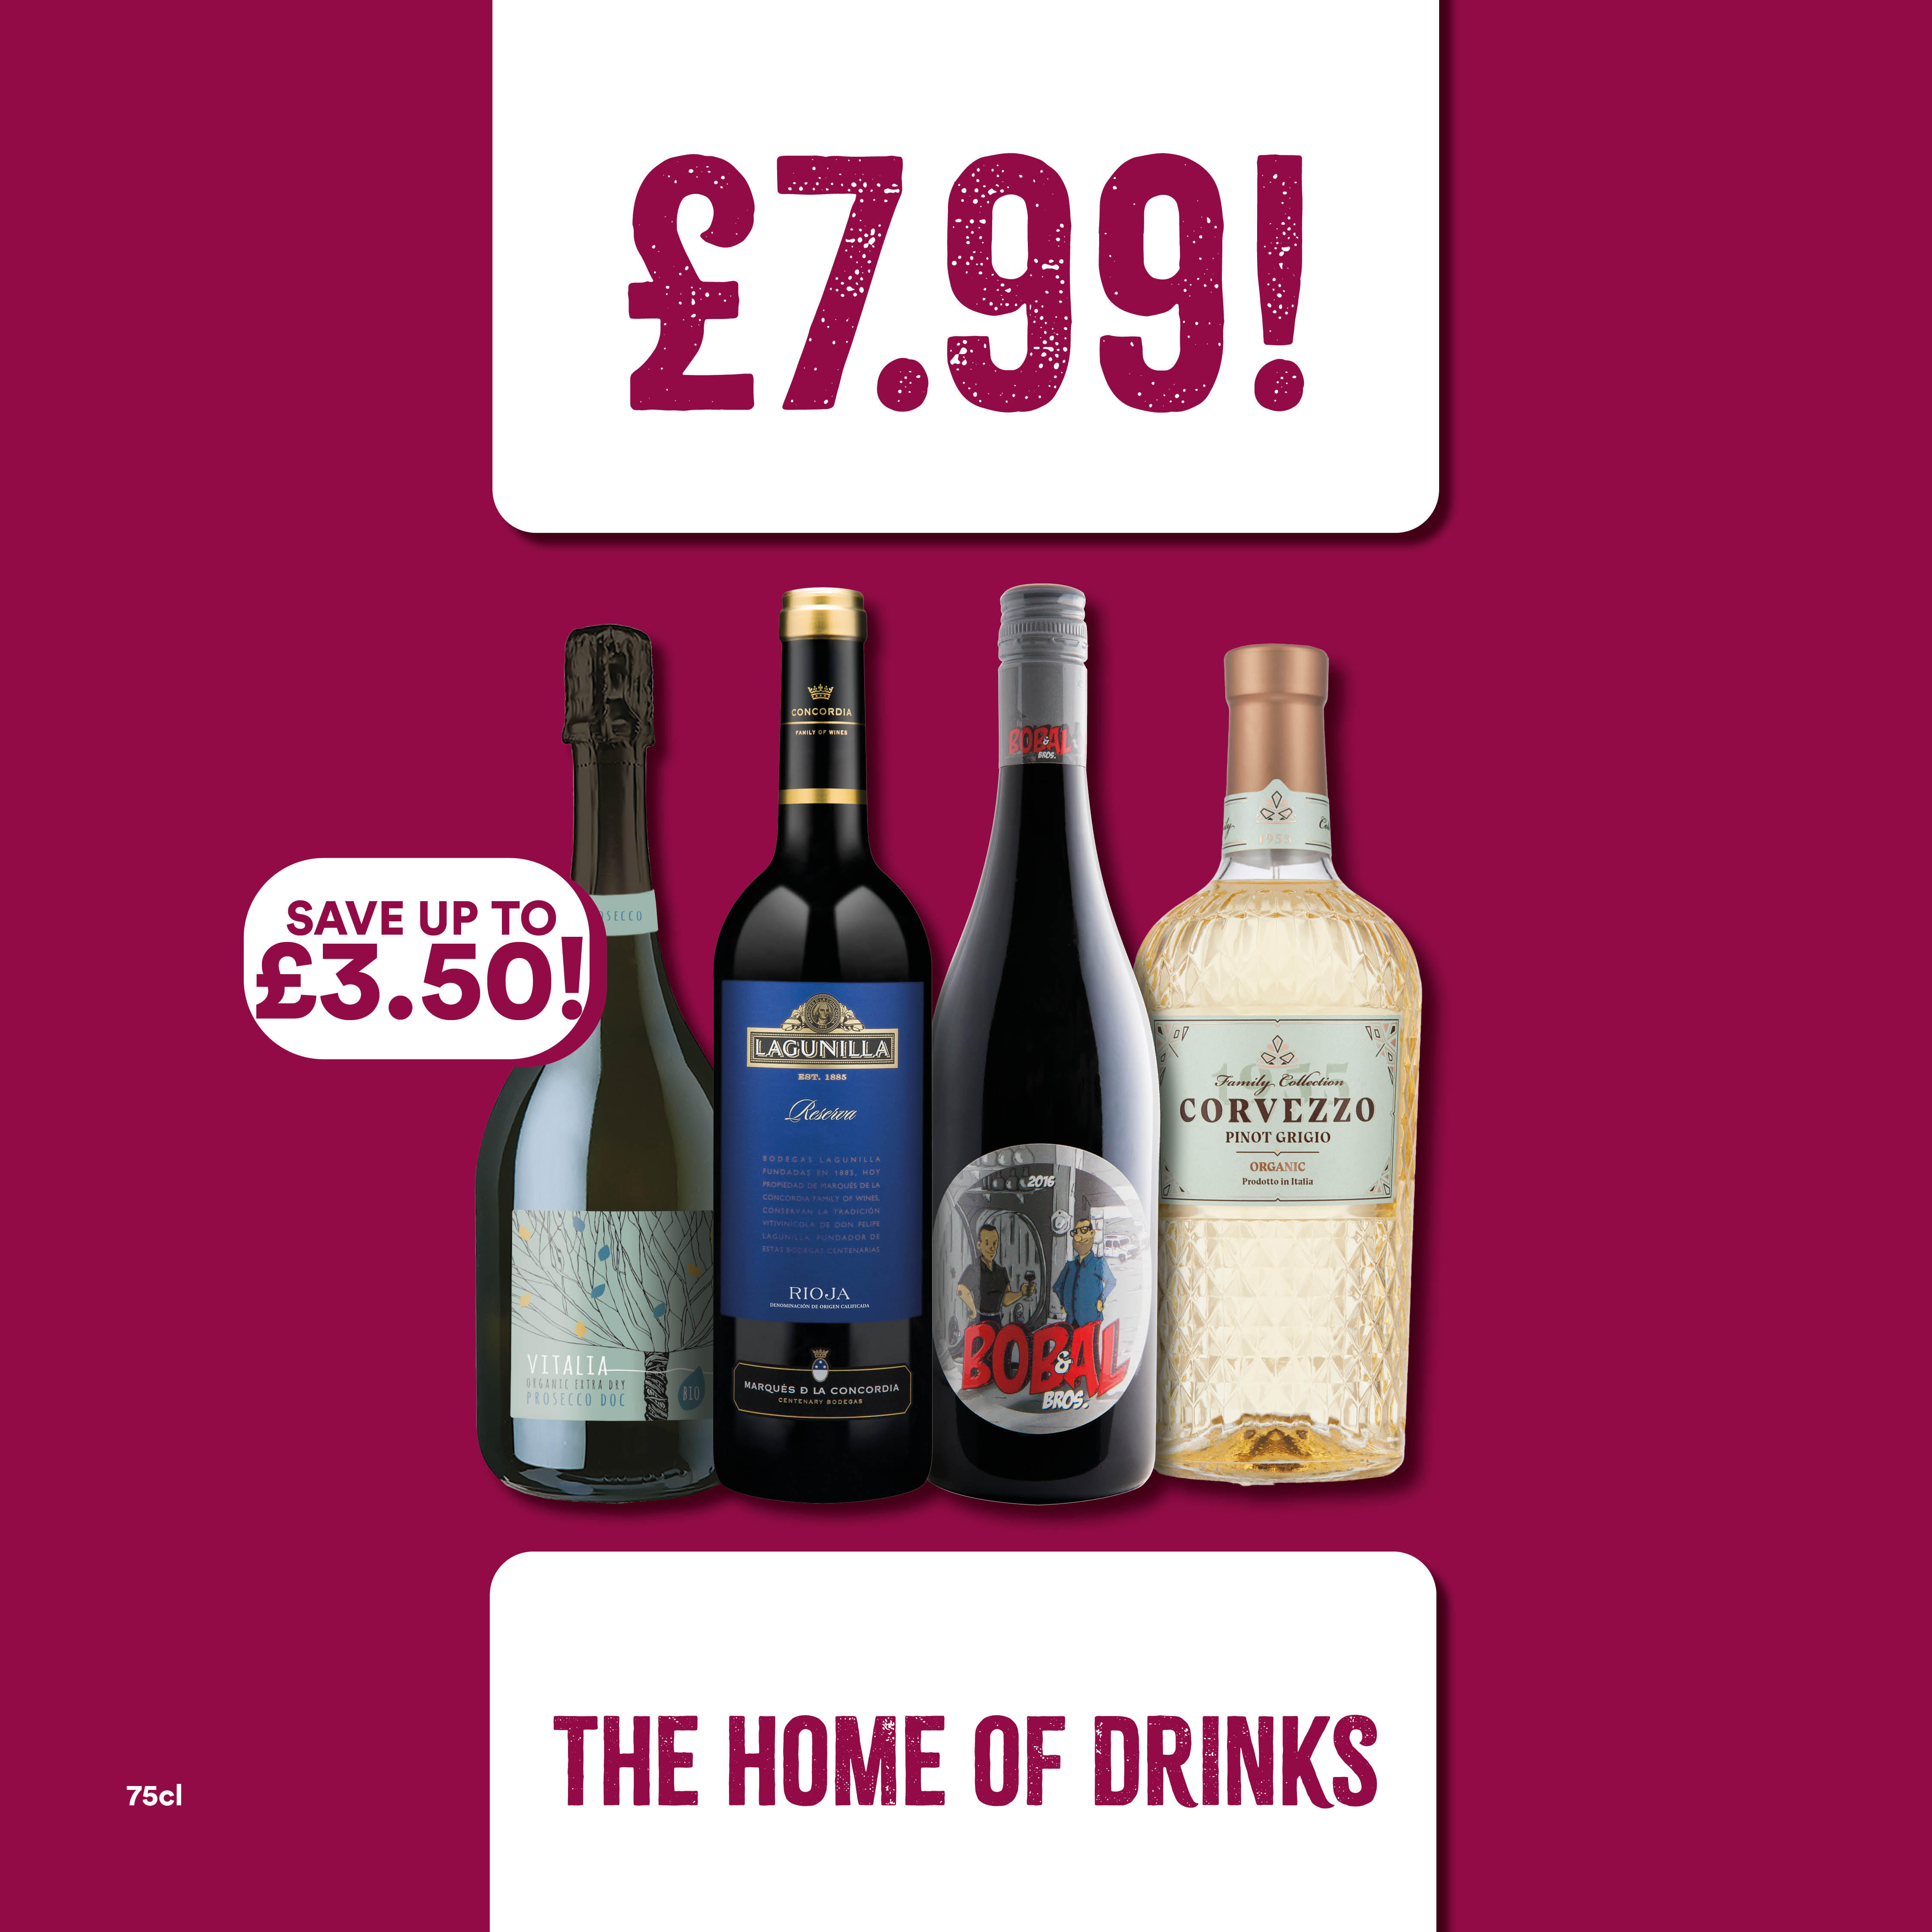 £7.99 on selected wines Bargain Booze Plus Derby 01332 554137